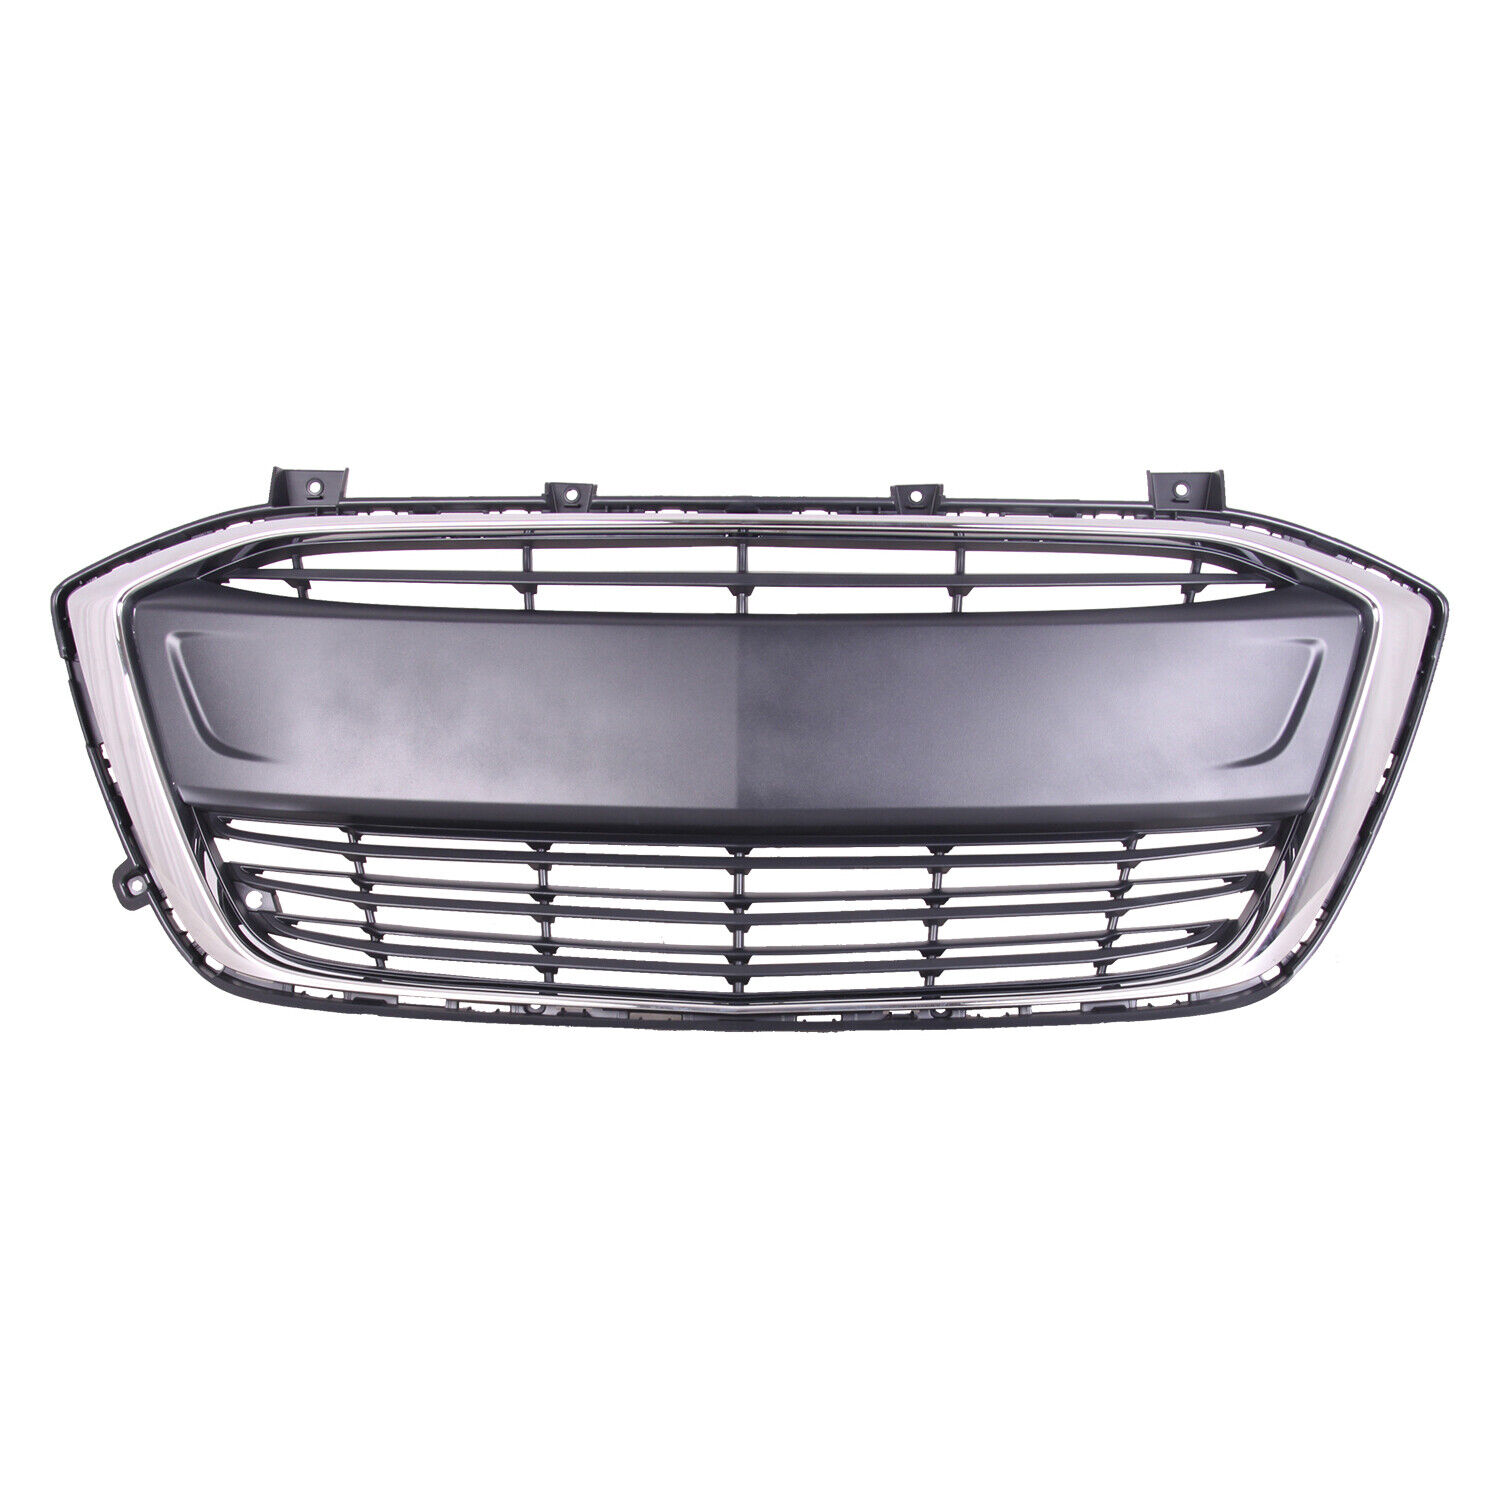 New Front Lower Grille Fits 2017-2020 Chevrolet Sonic 104-10112 CAPA